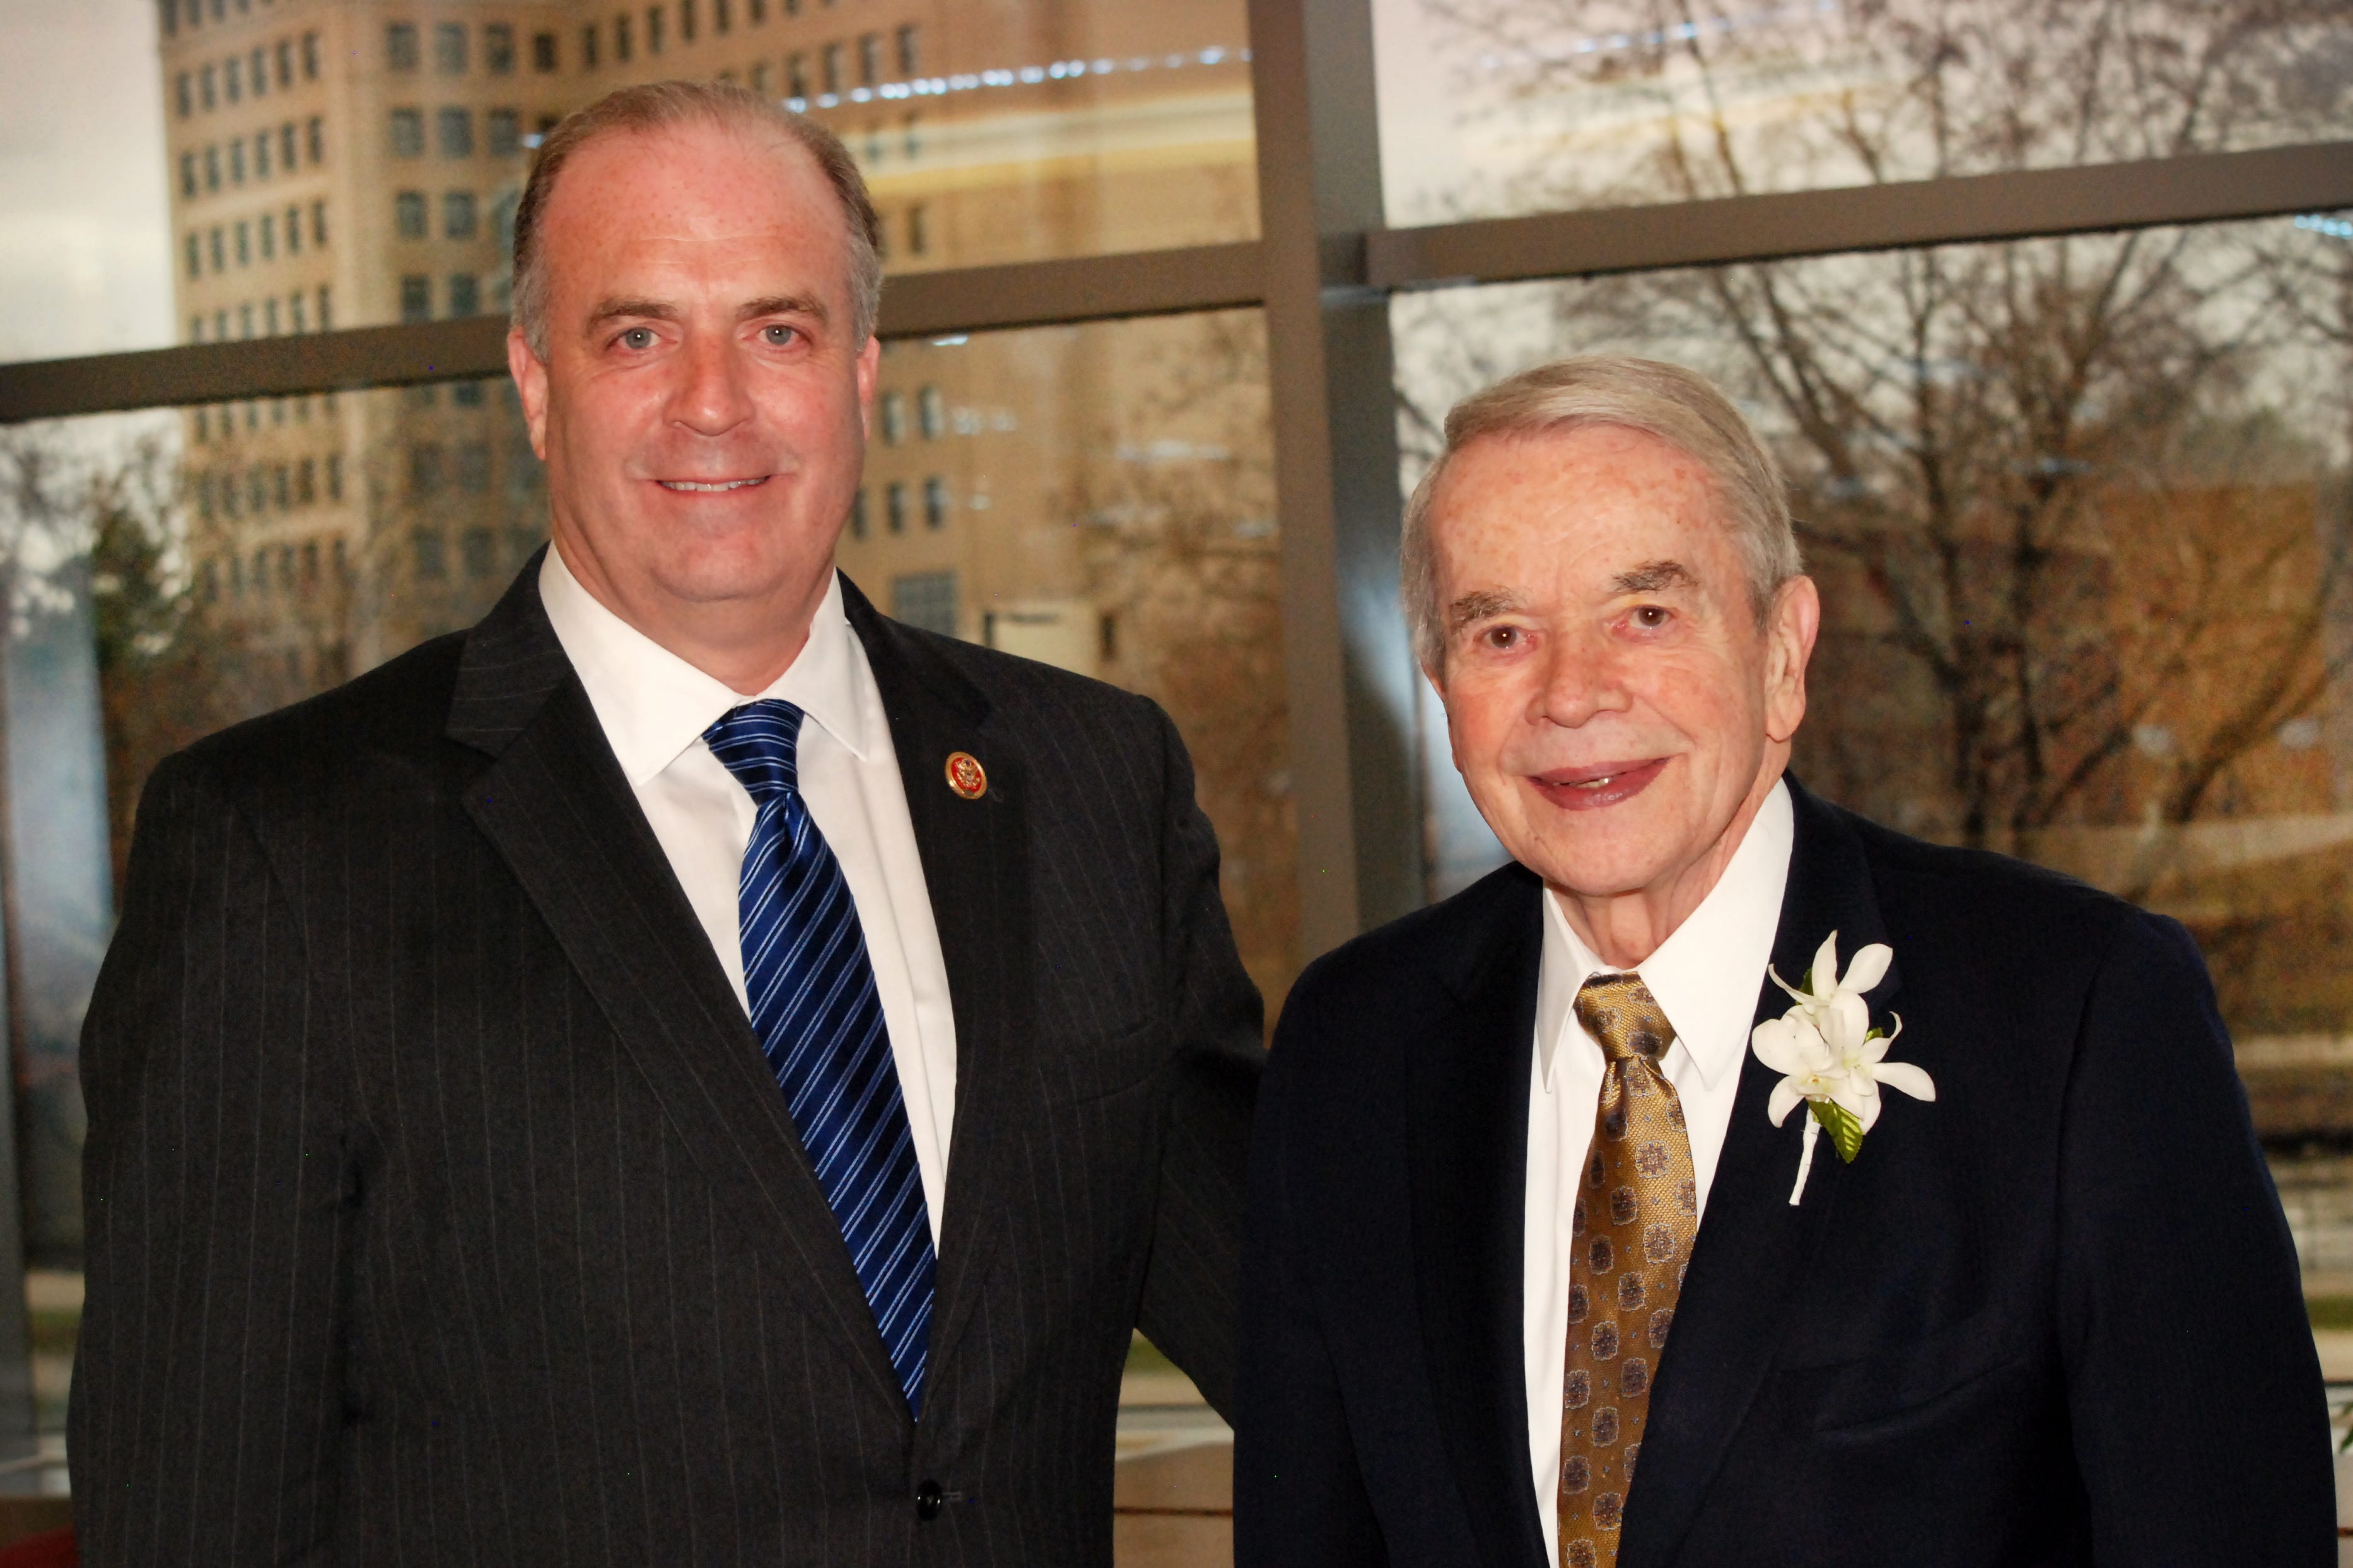 Former U.S. Rep. Dale Kildee, right, has died at age 92. He was succeeding in Congress by his nephew, U.S. Rep. Dan Kildee of Flint Township. The two are pictured in Flint in 2014.